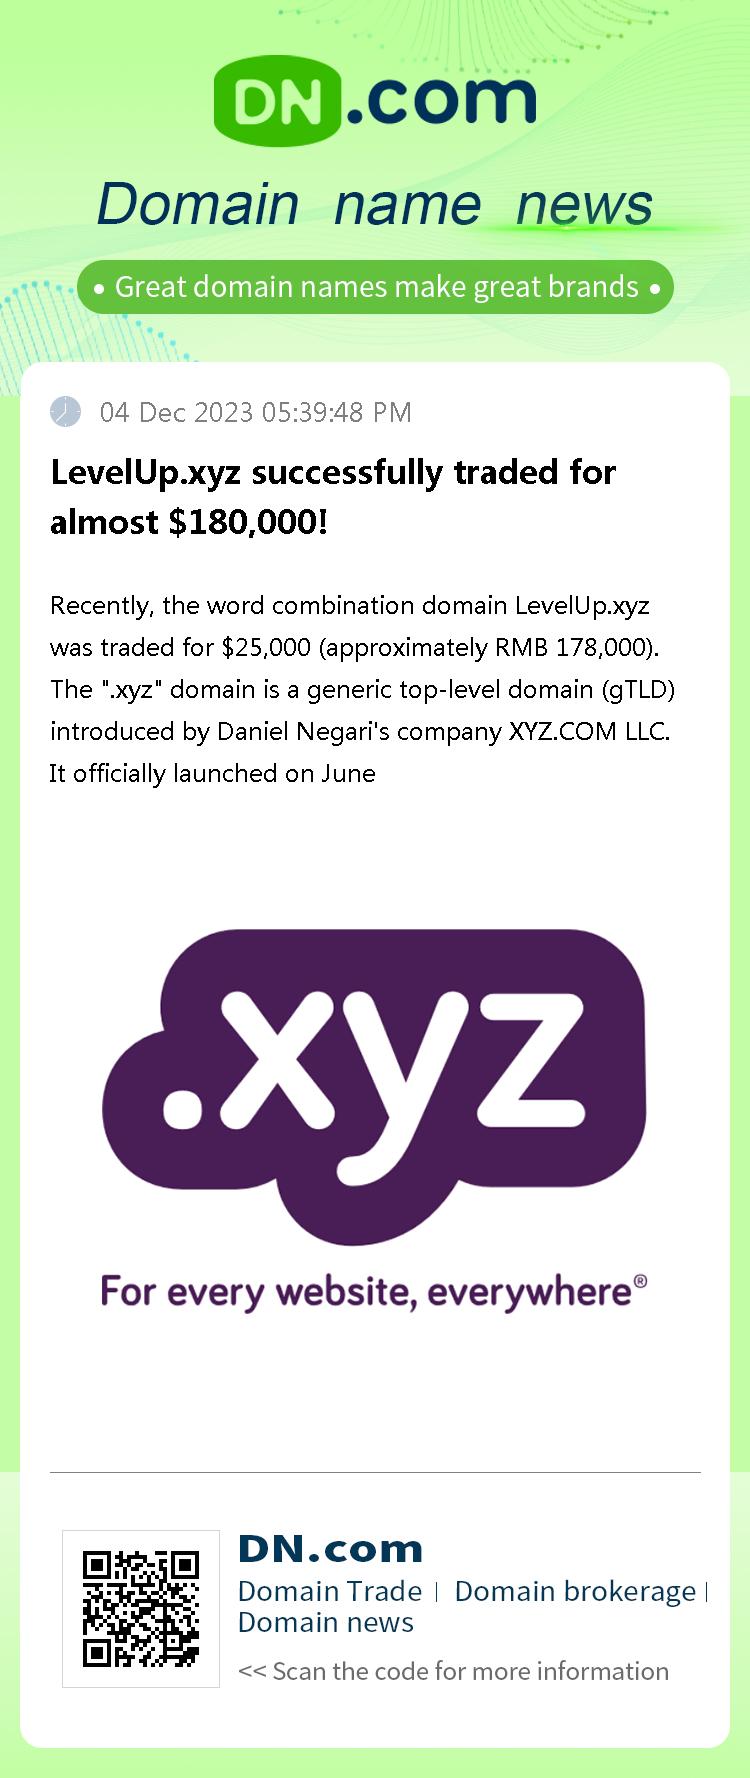 LevelUp.xyz successfully traded for almost $180,000!